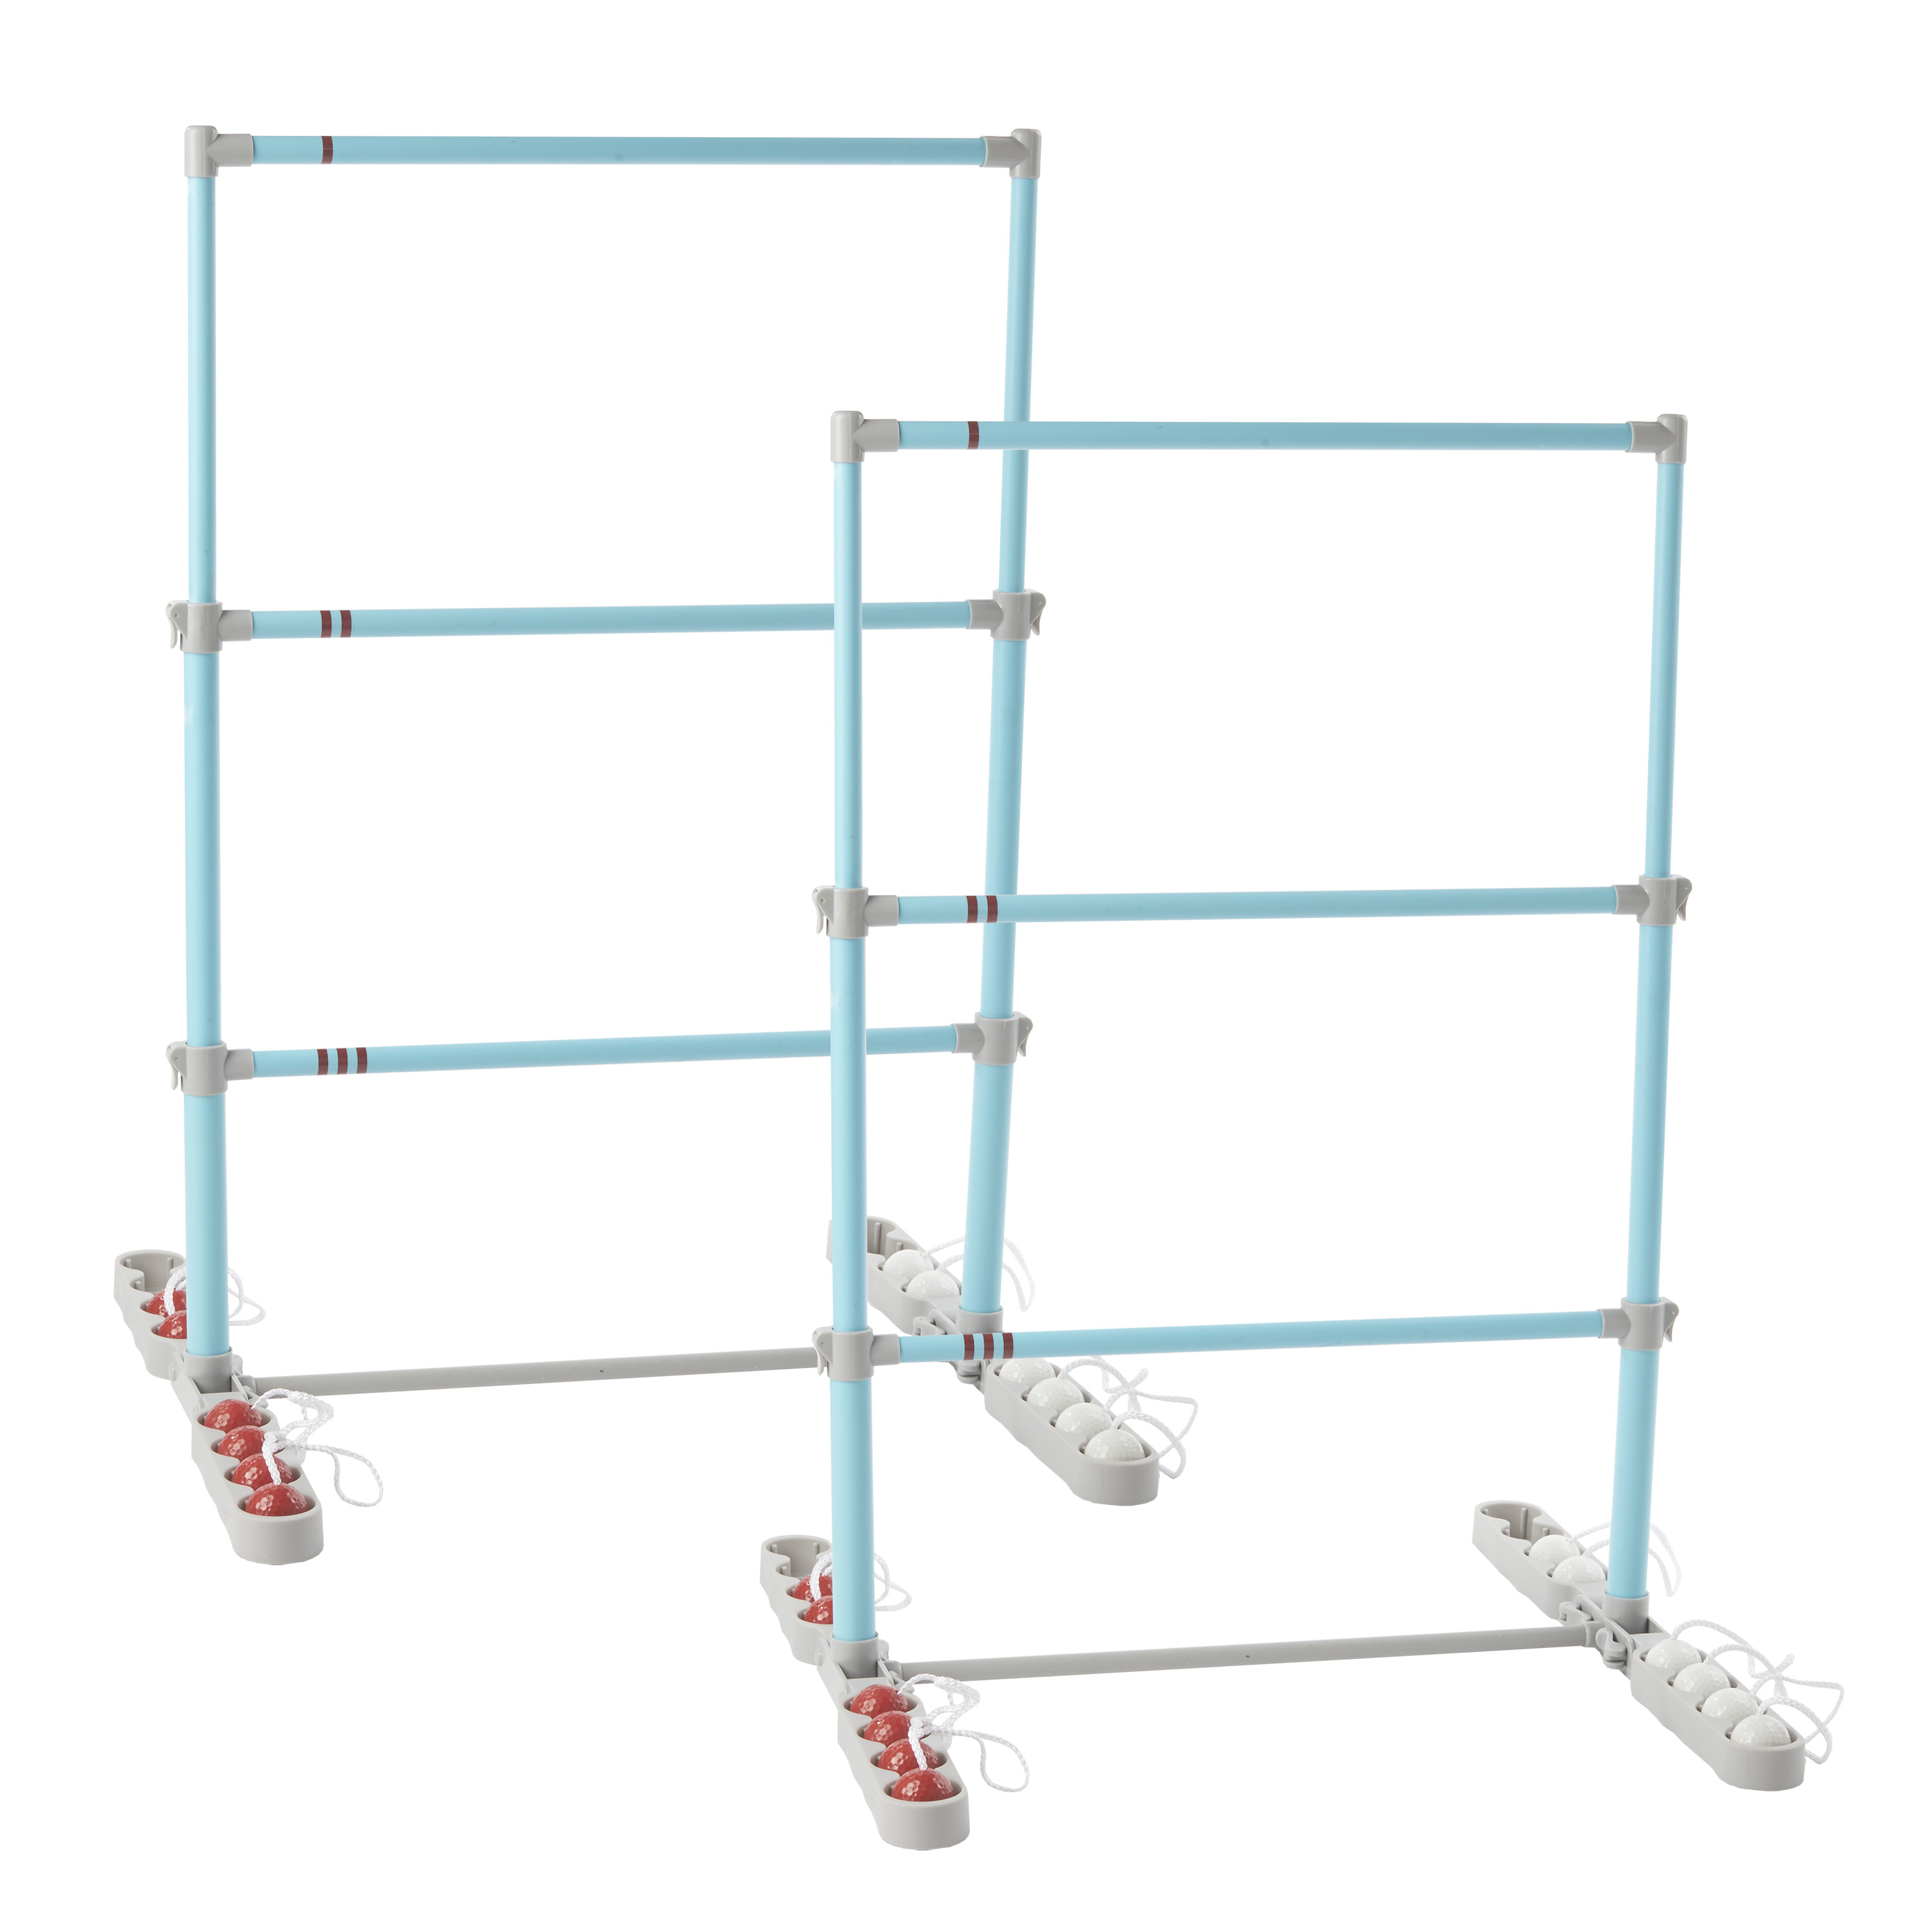 Franklin Sports Multi-color Portable Ladder Toss Game Set, 8 Pieces - image 1 of 5